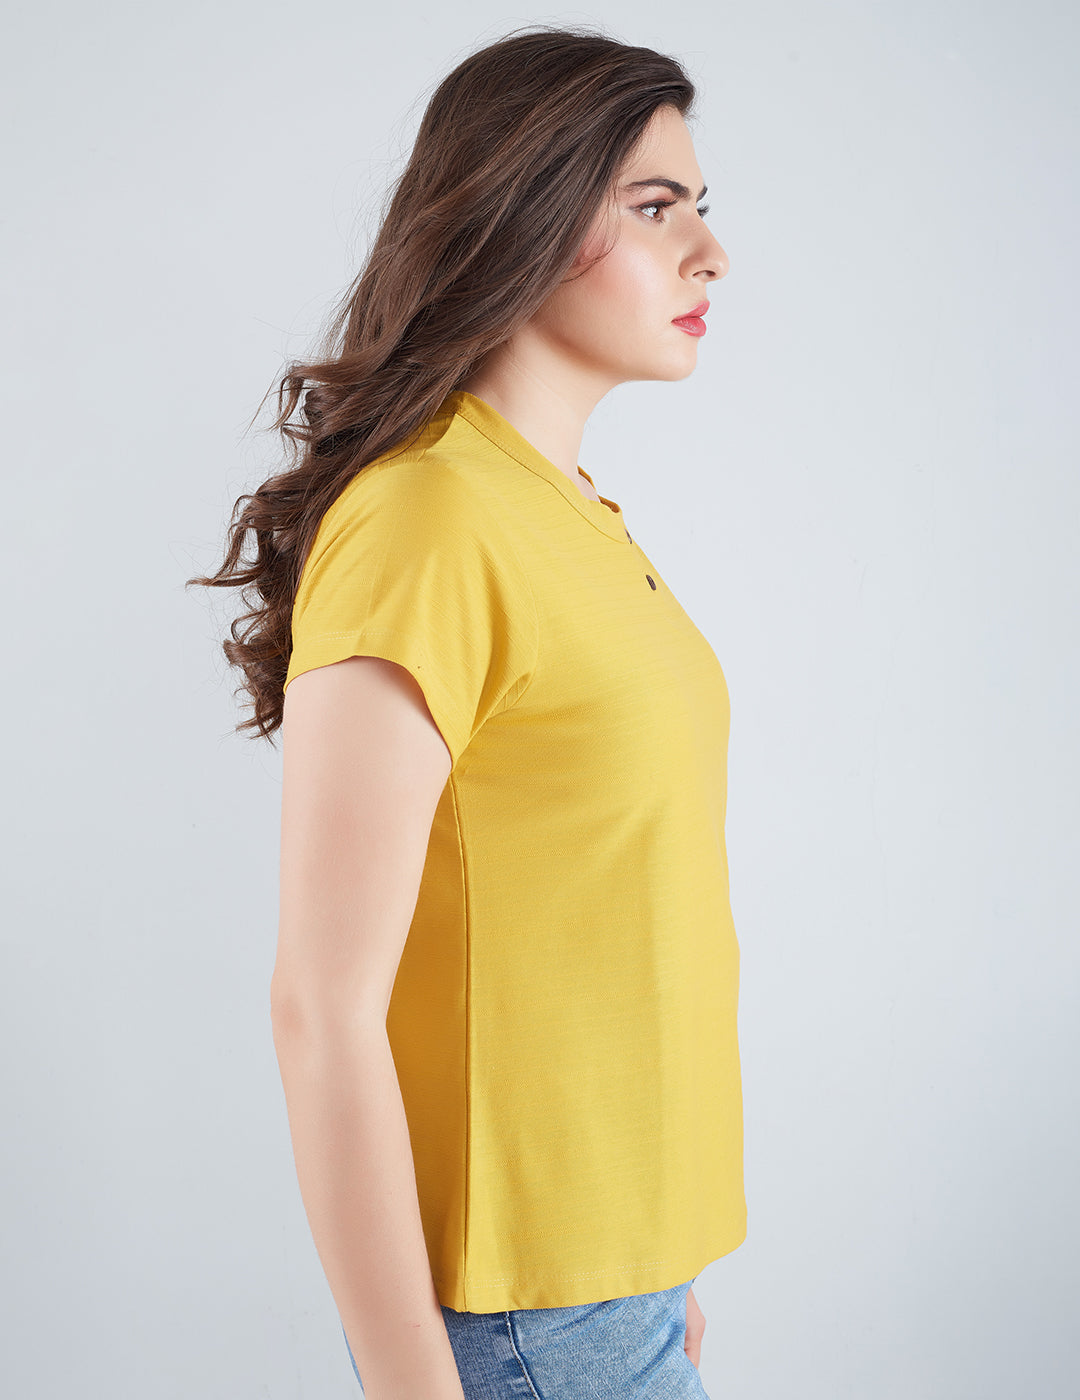 Comfortable Plain Short T-shirts For Women In mango At Online